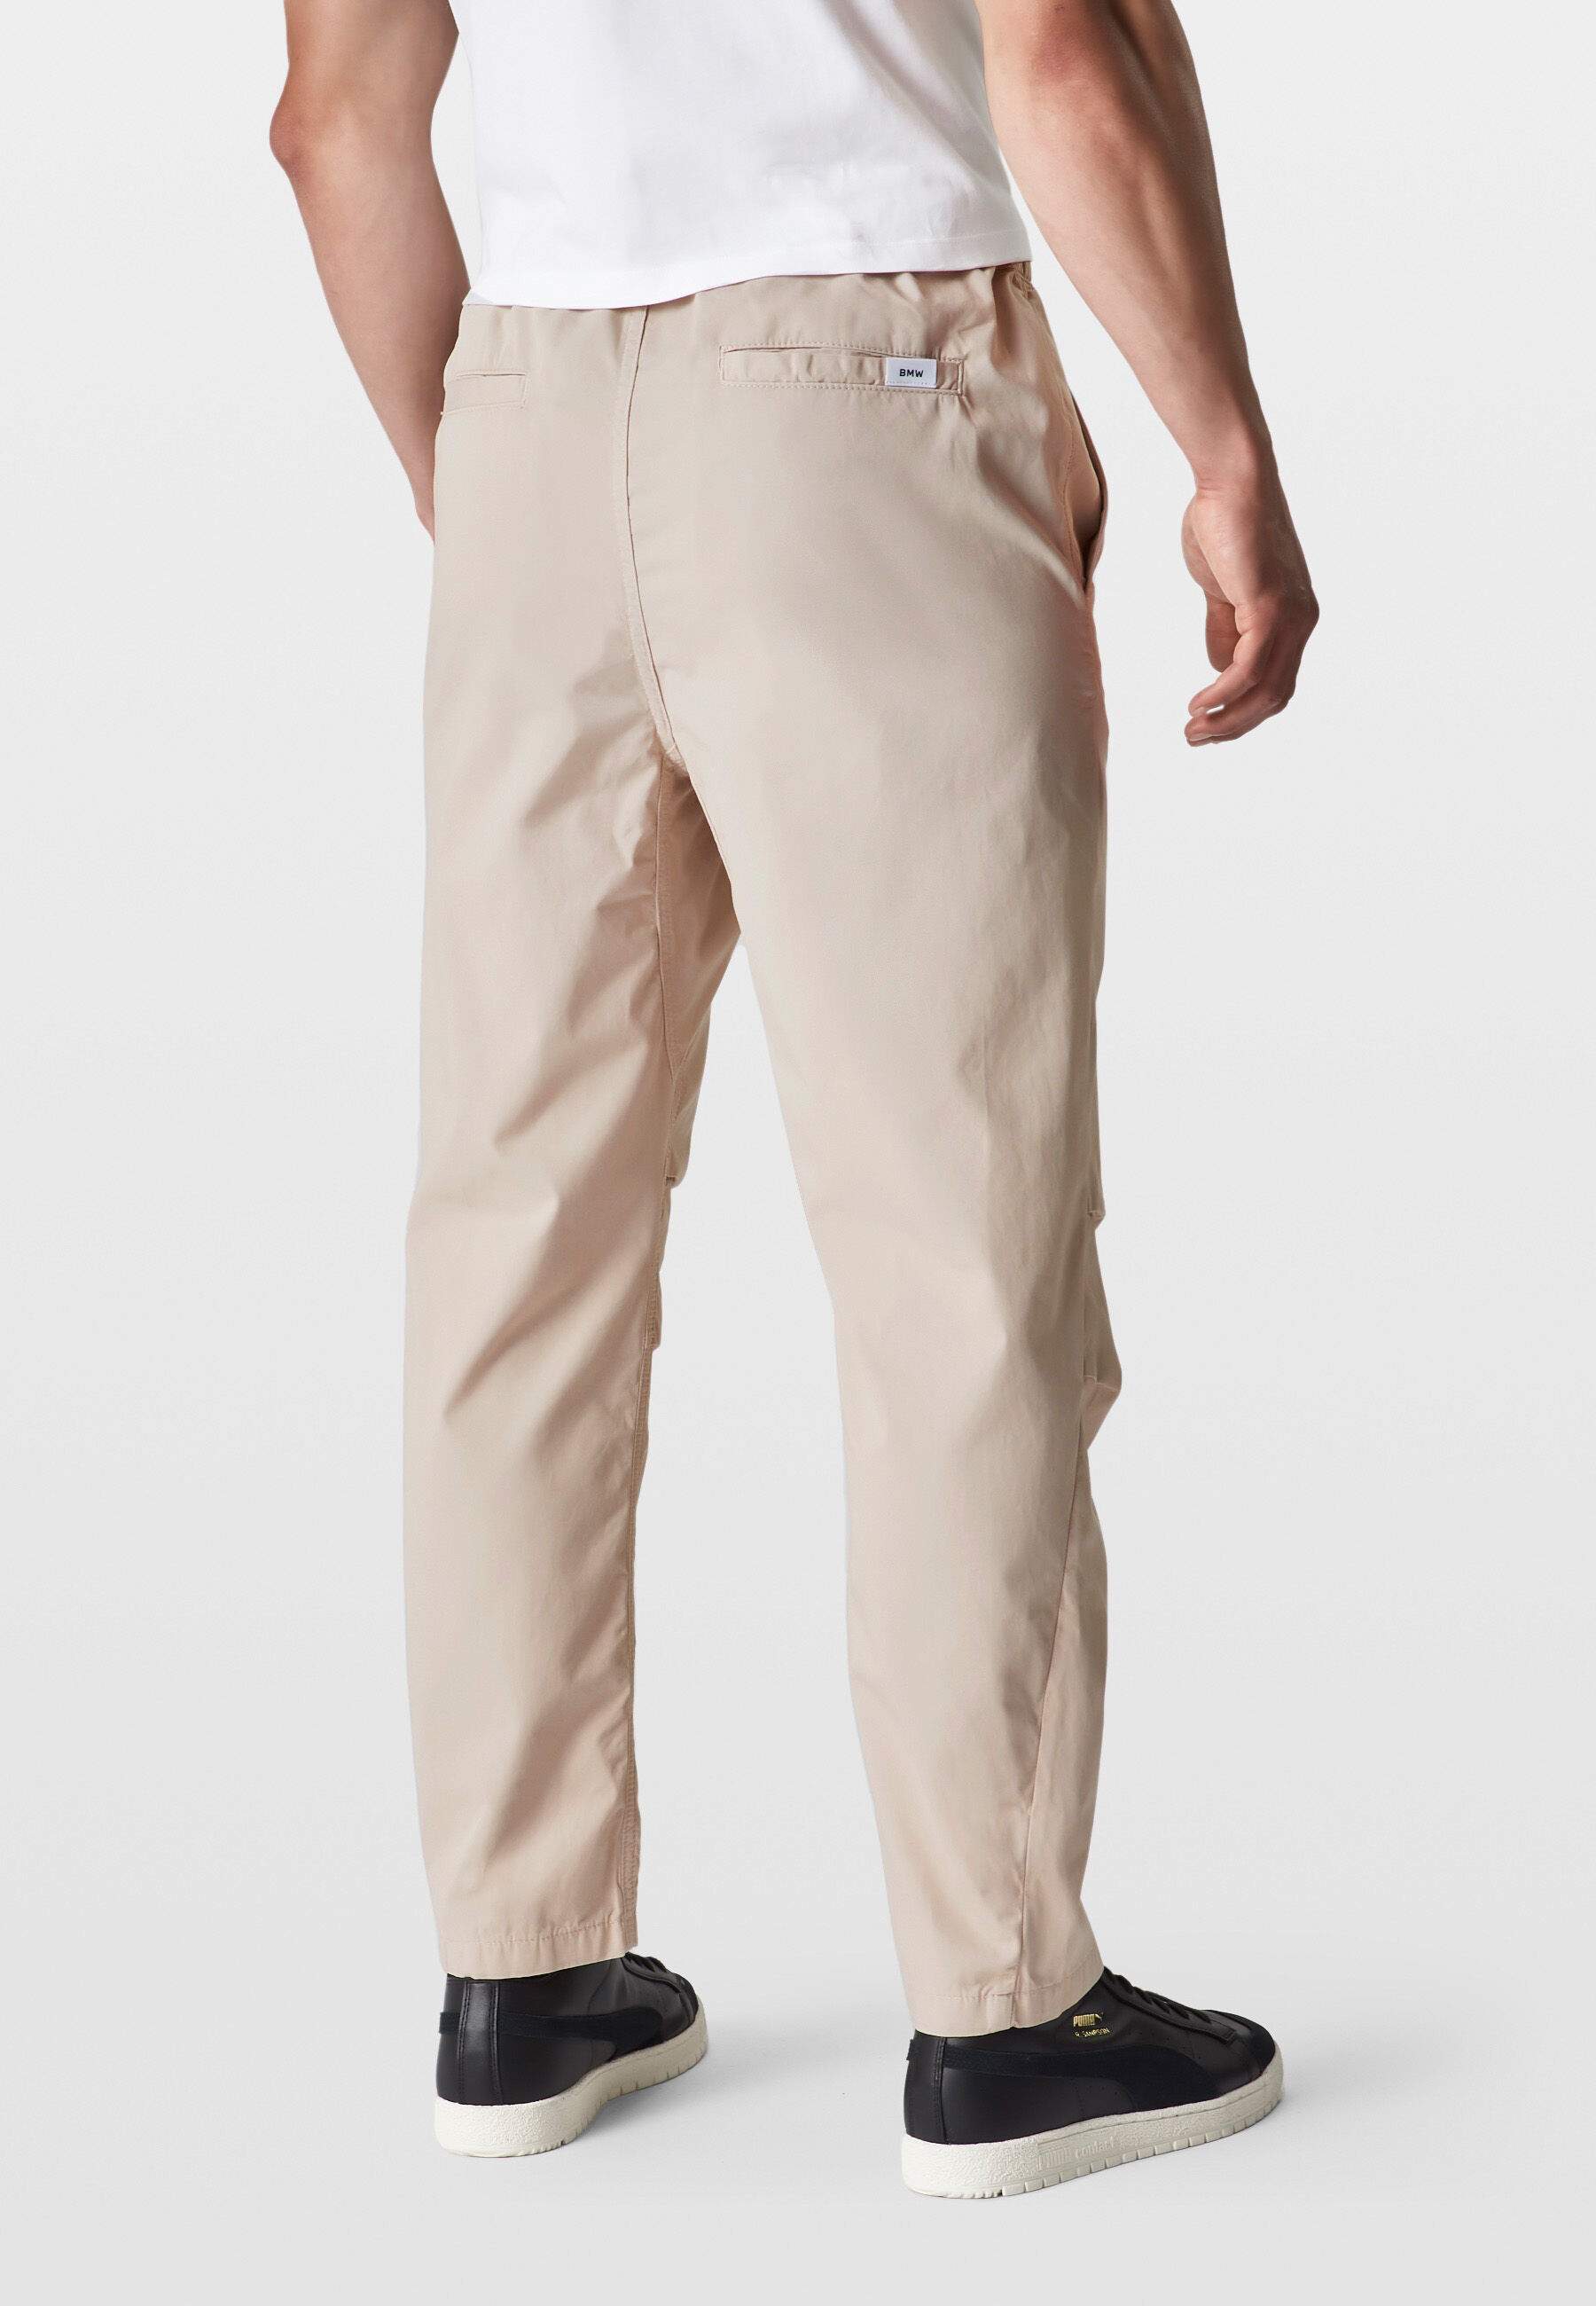 Discover more than 124 bmw trousers best